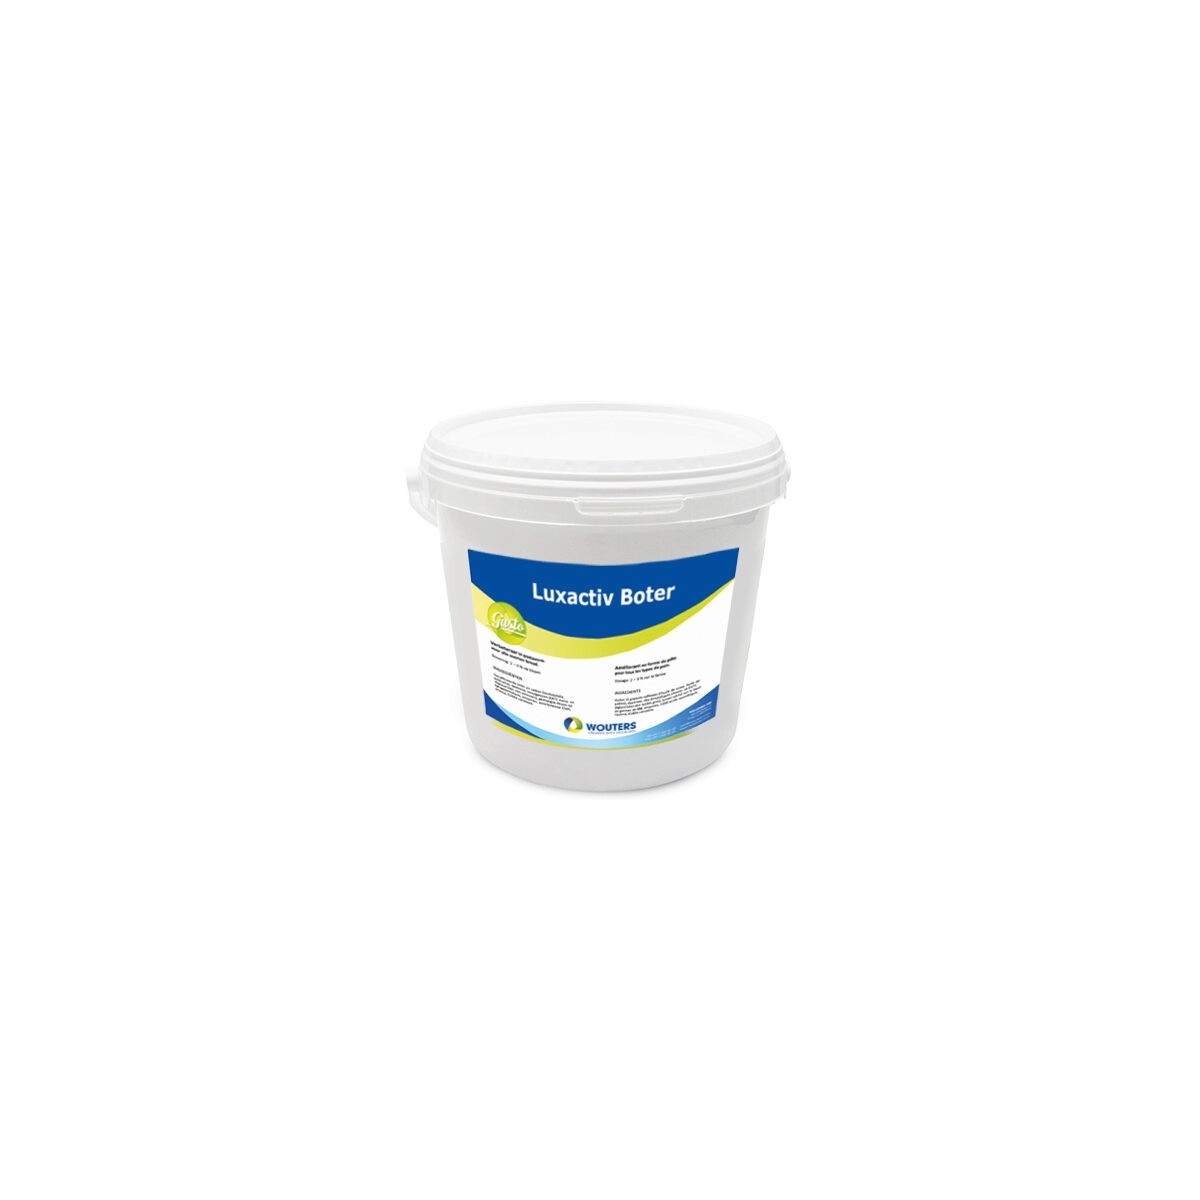 WOUTERS LUXACTIV BUTTER FOR LUXURY PASTE 10KG  KG